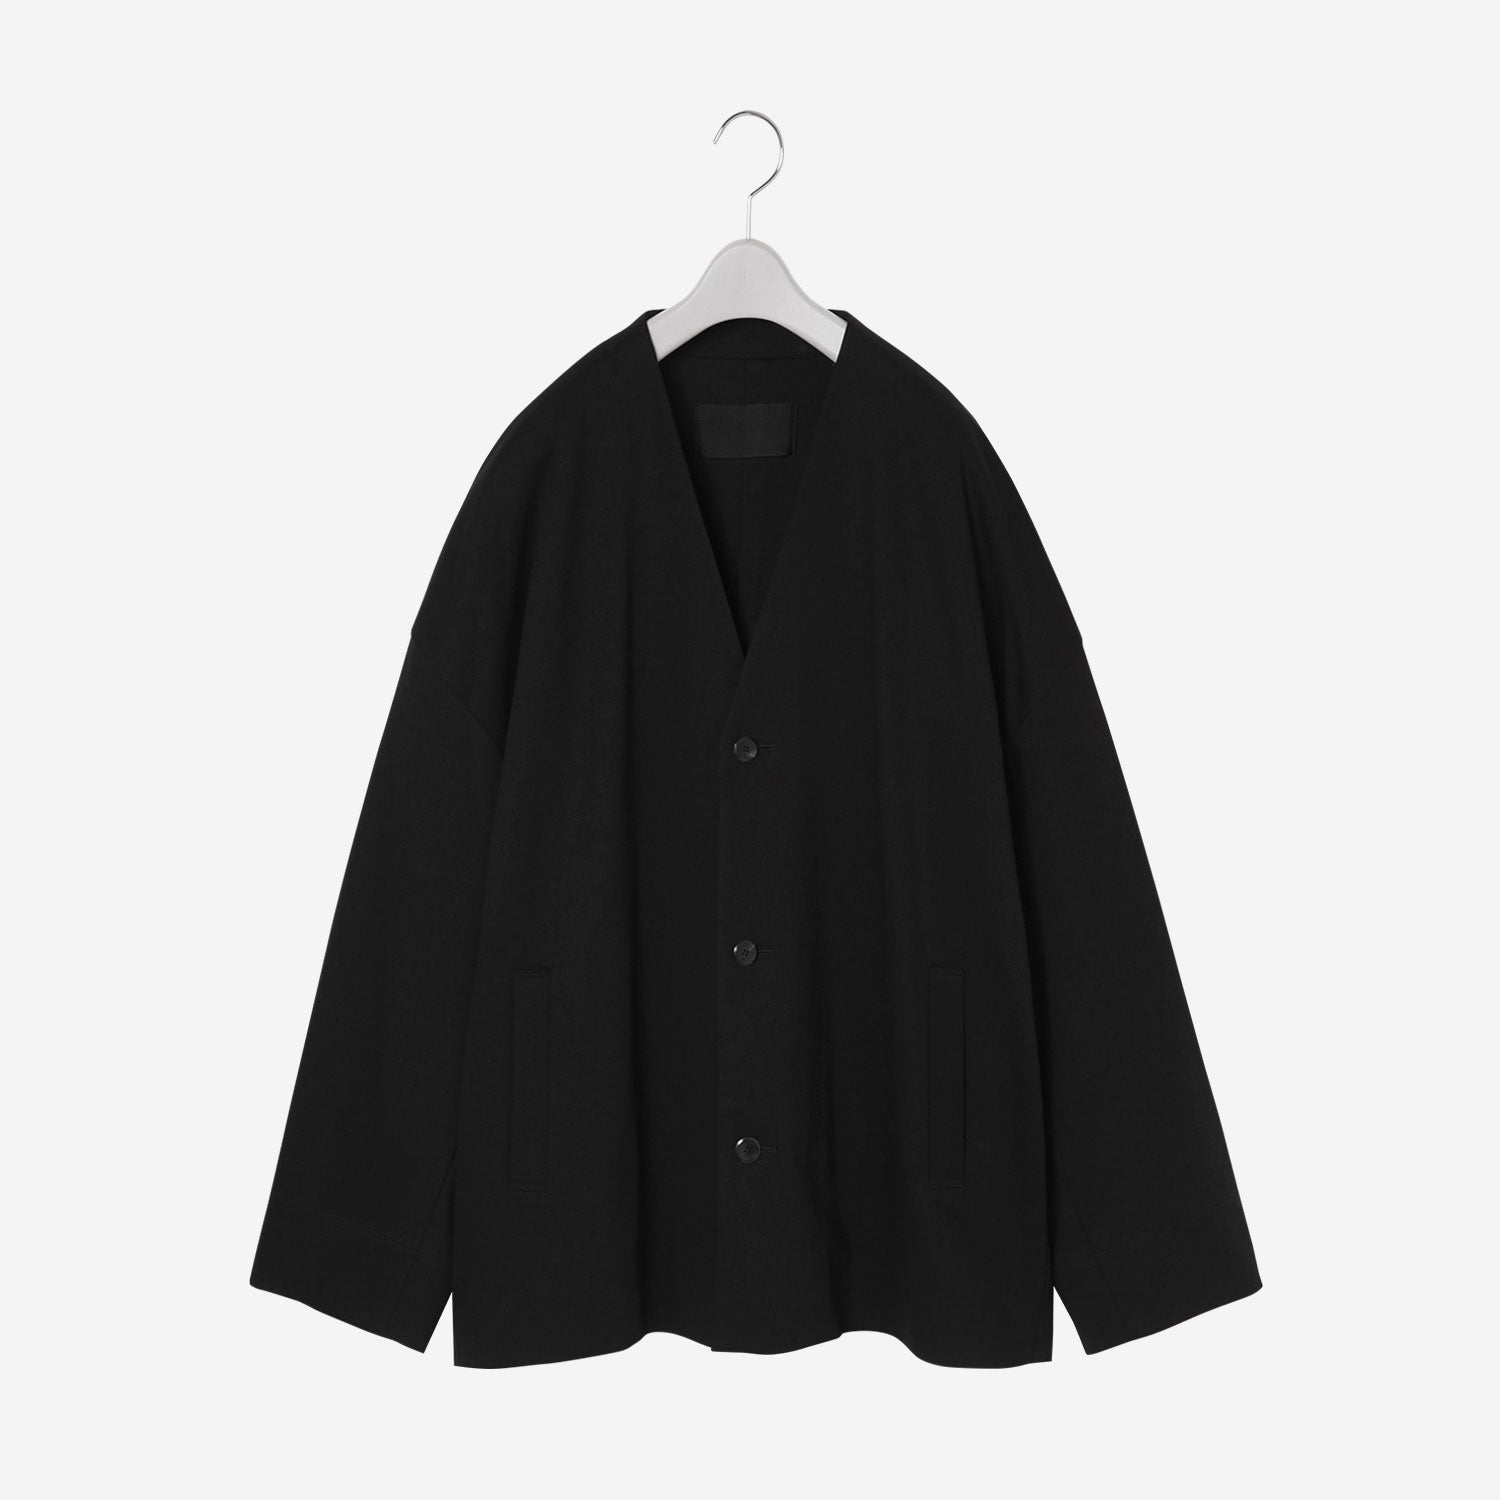 th products No Collar Jacket